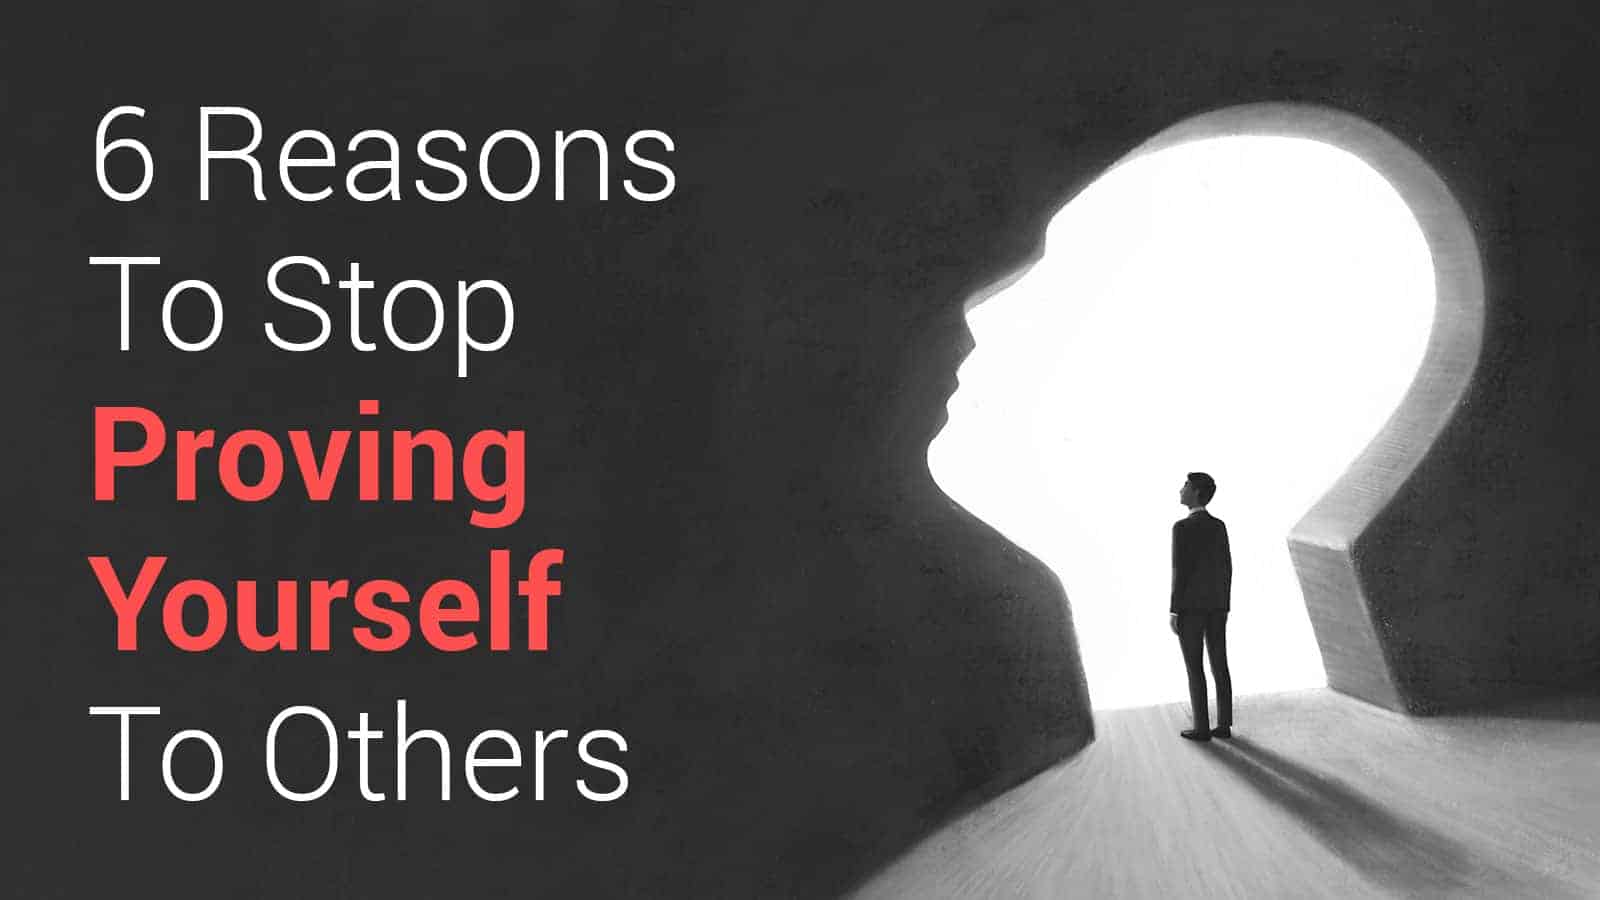 Experts Explain 6 Reasons To Stop Proving Yourself To Others